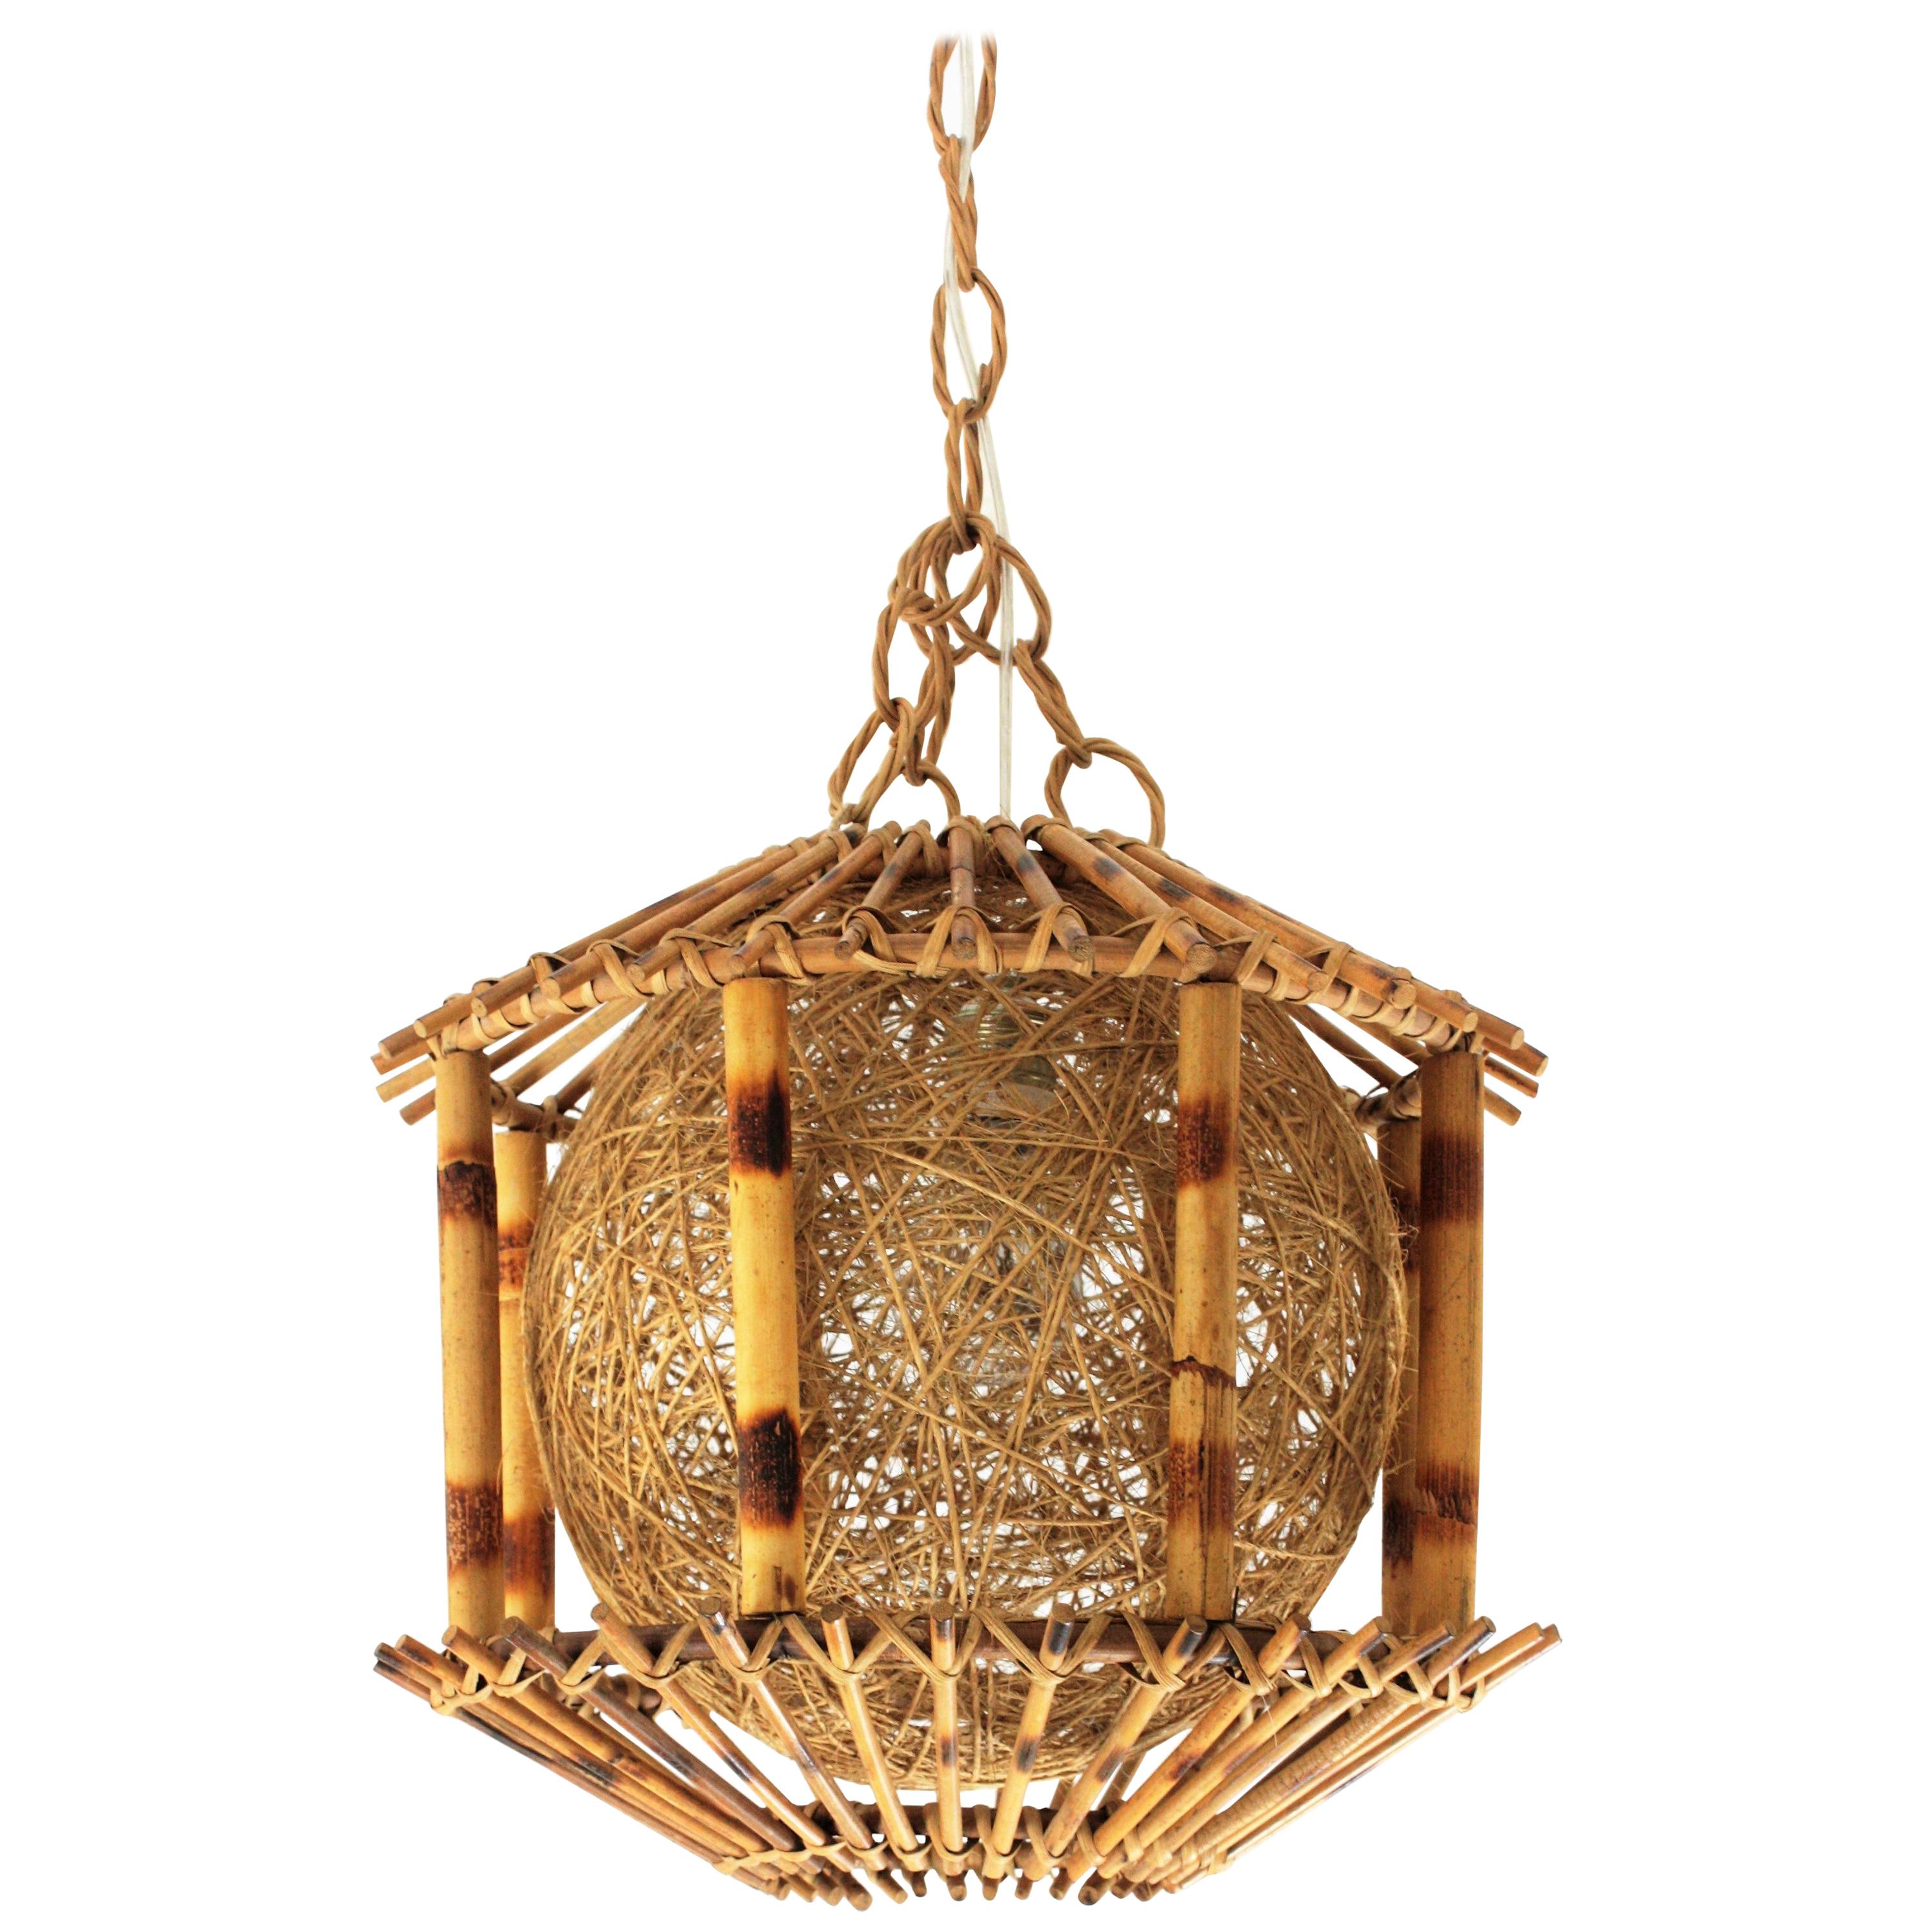 Rattan and Bamboo Pendant Hanging Lamp / Lantern with Chinoiserie Accents